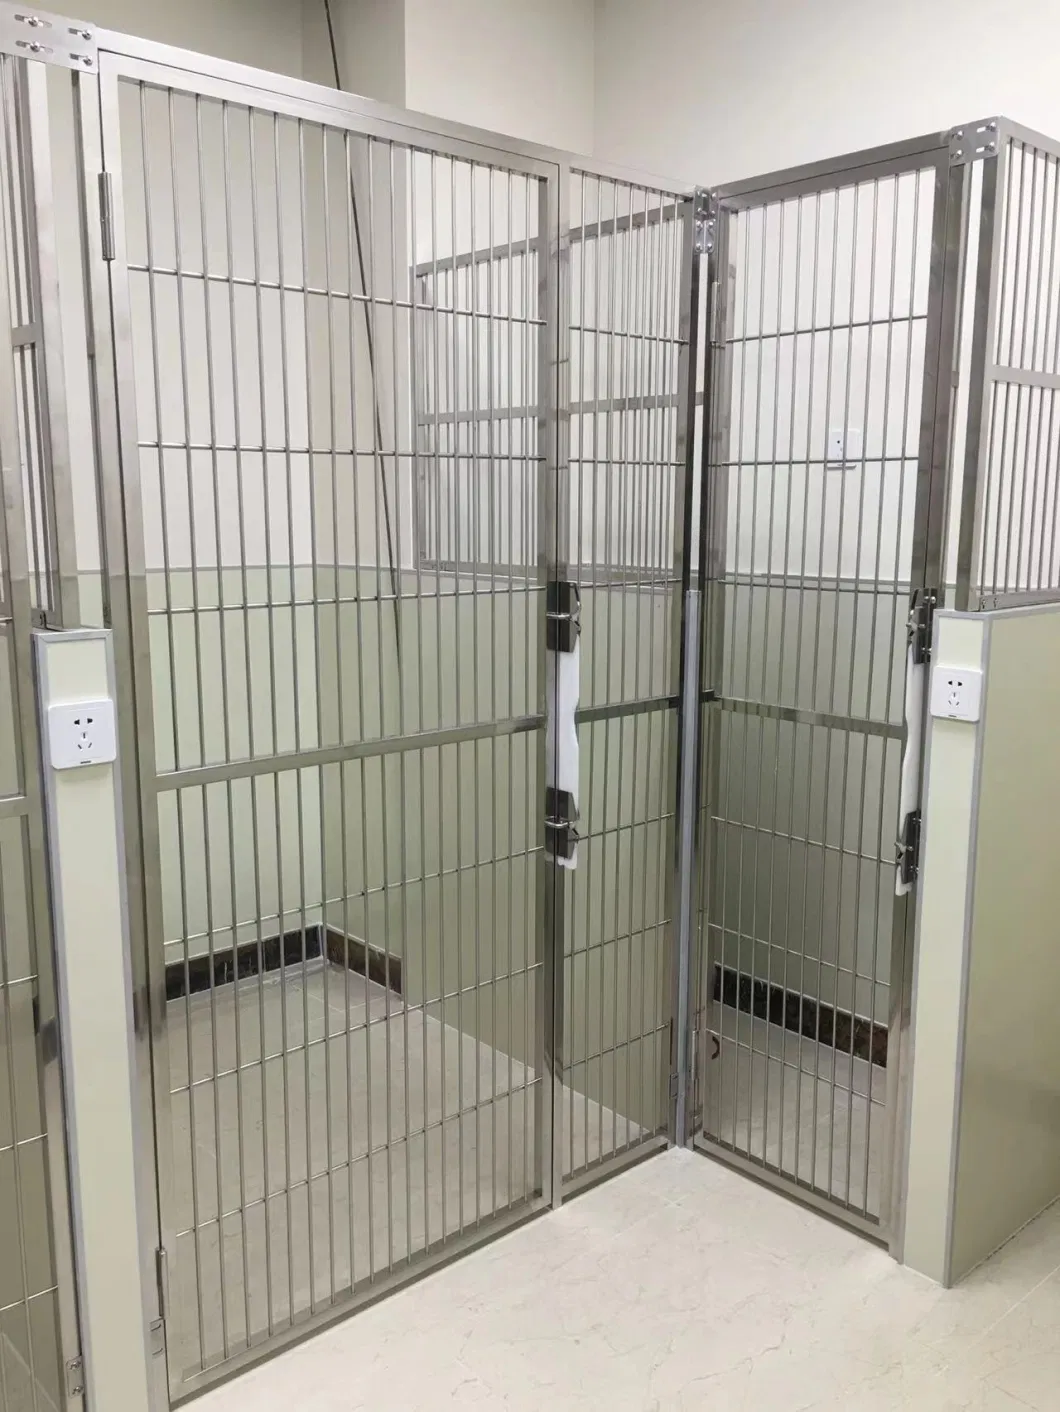 Kennel Stainless Steel Pet Dog Cage Dog Kennel Runs Outdoor Indoor Heated Dog Kennel